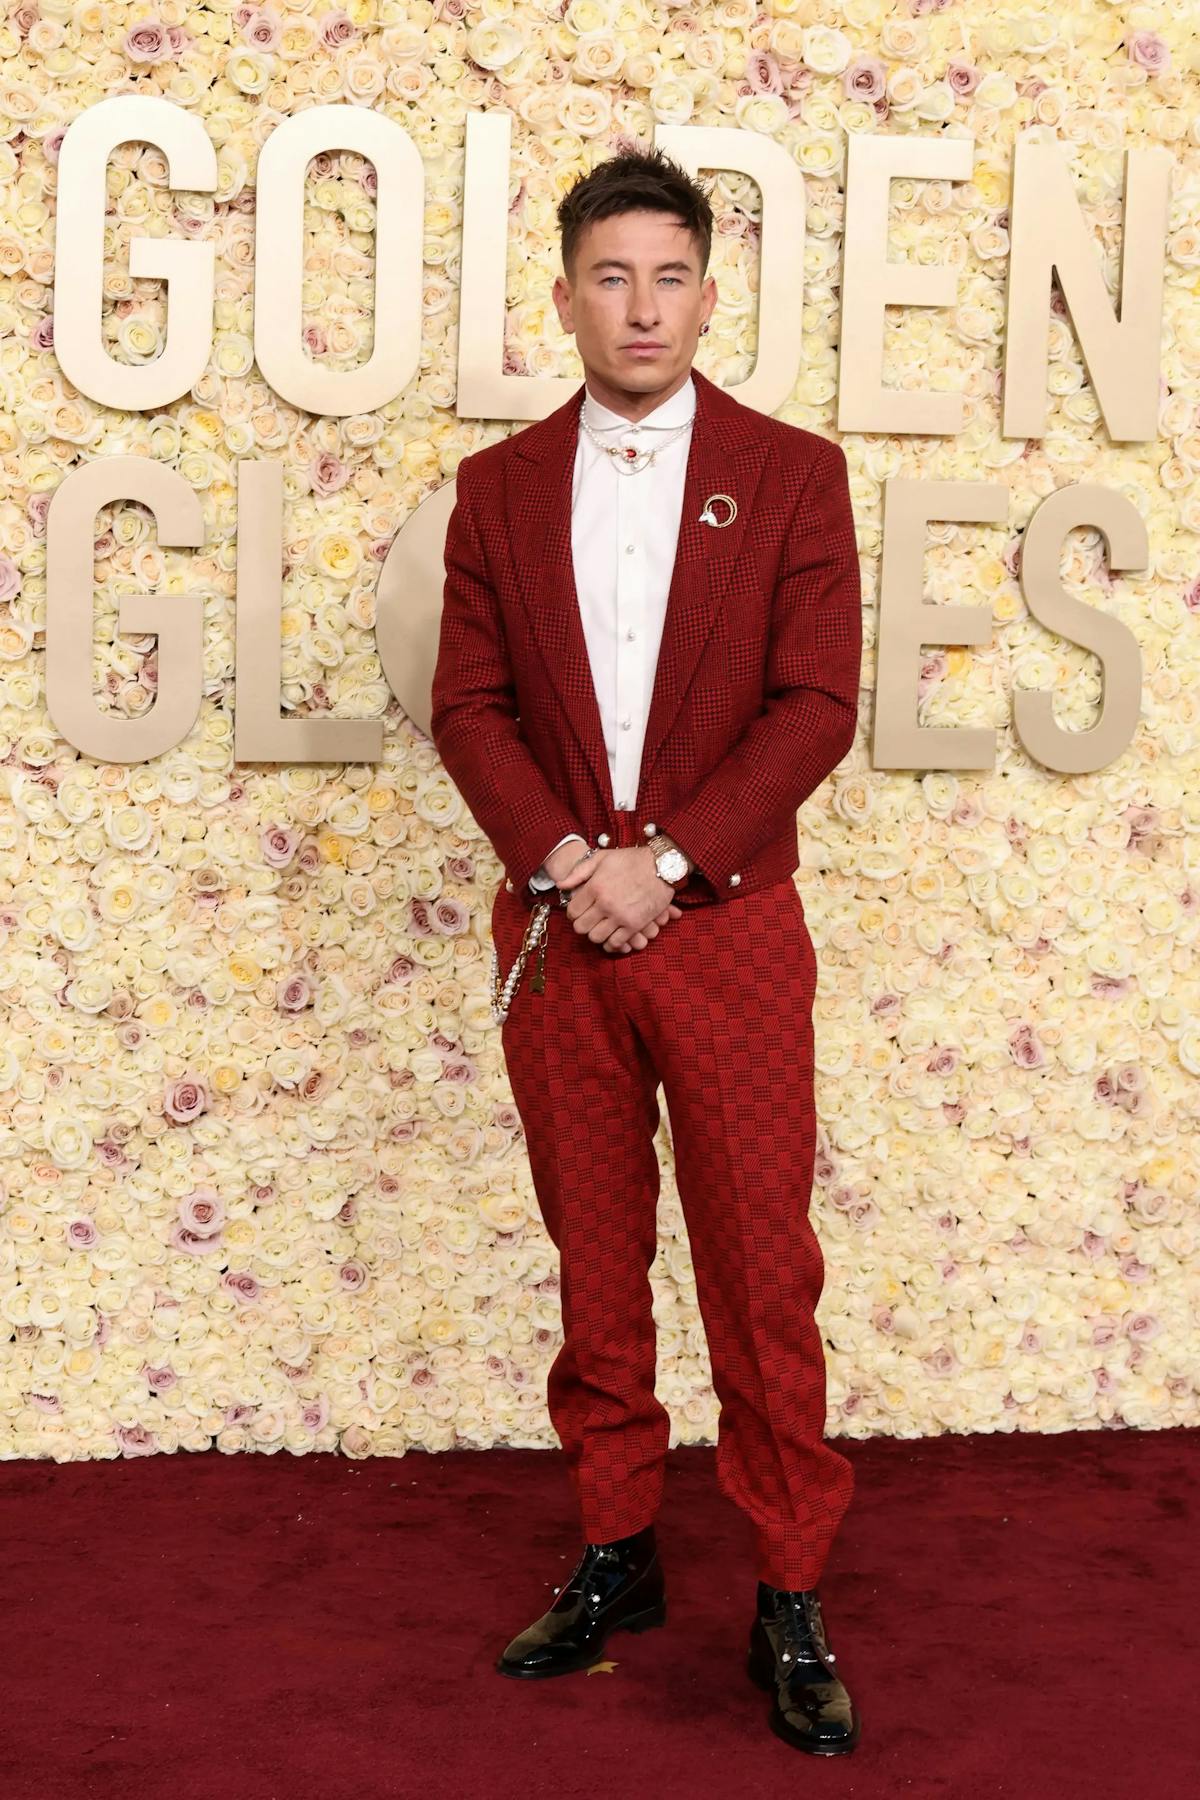 Barry Keoghan wears a red patterned tuxedo to the Golden Globes 2024 awards show for bold red carpet style.